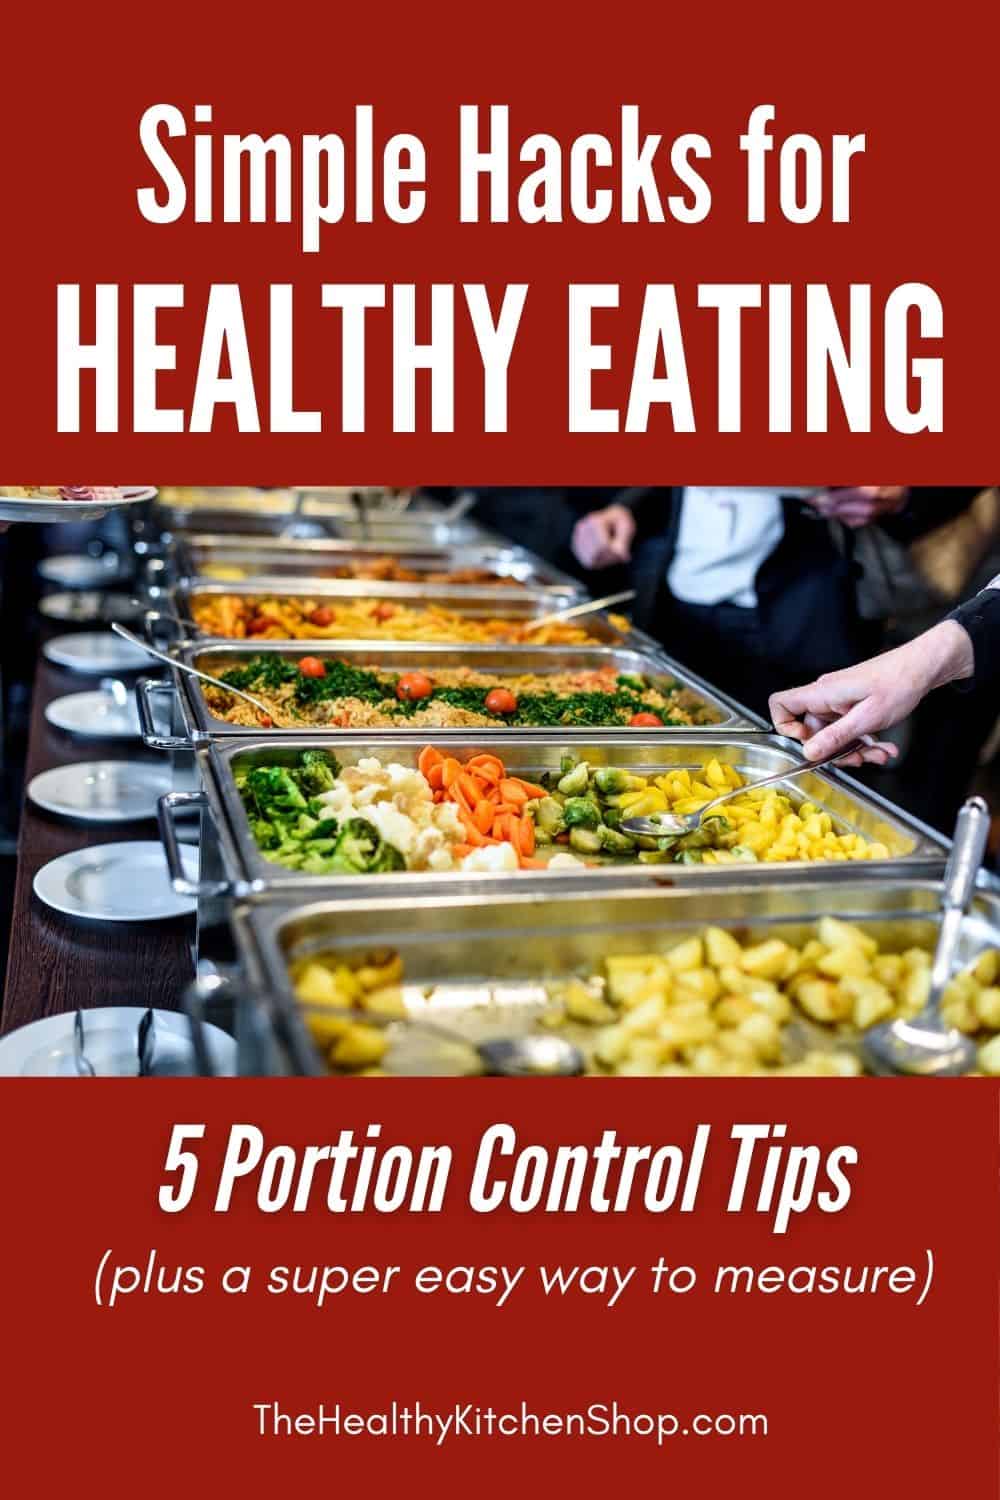 Simple Hacks for Healthy Eating - 5 Portion Control Tips